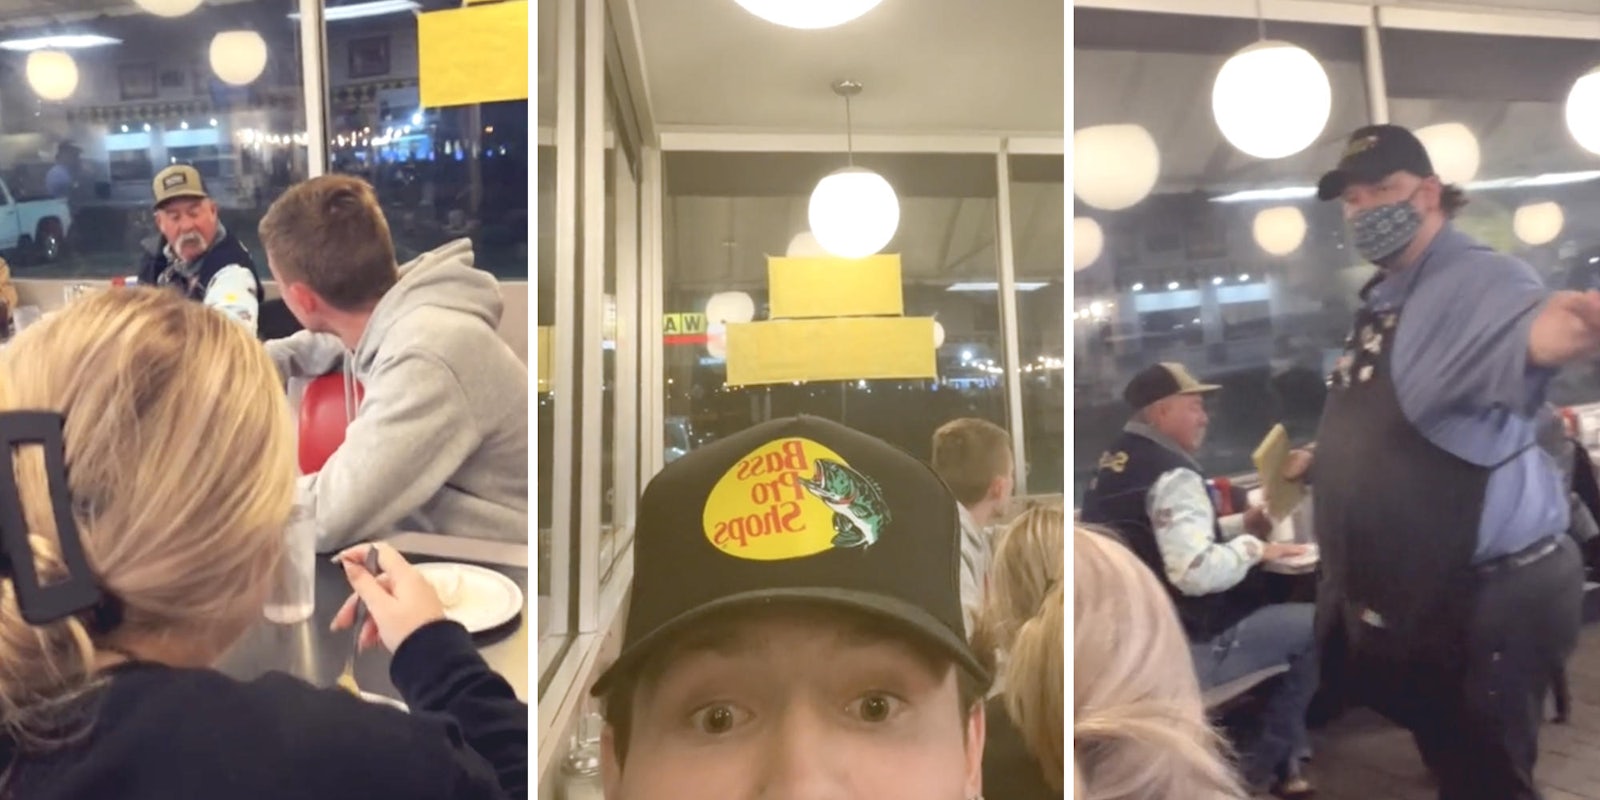 some customers at waffle house arguing (l) the tiktok user looking surprised (m) waffle house waiter heading over to the area to calm people down (r)